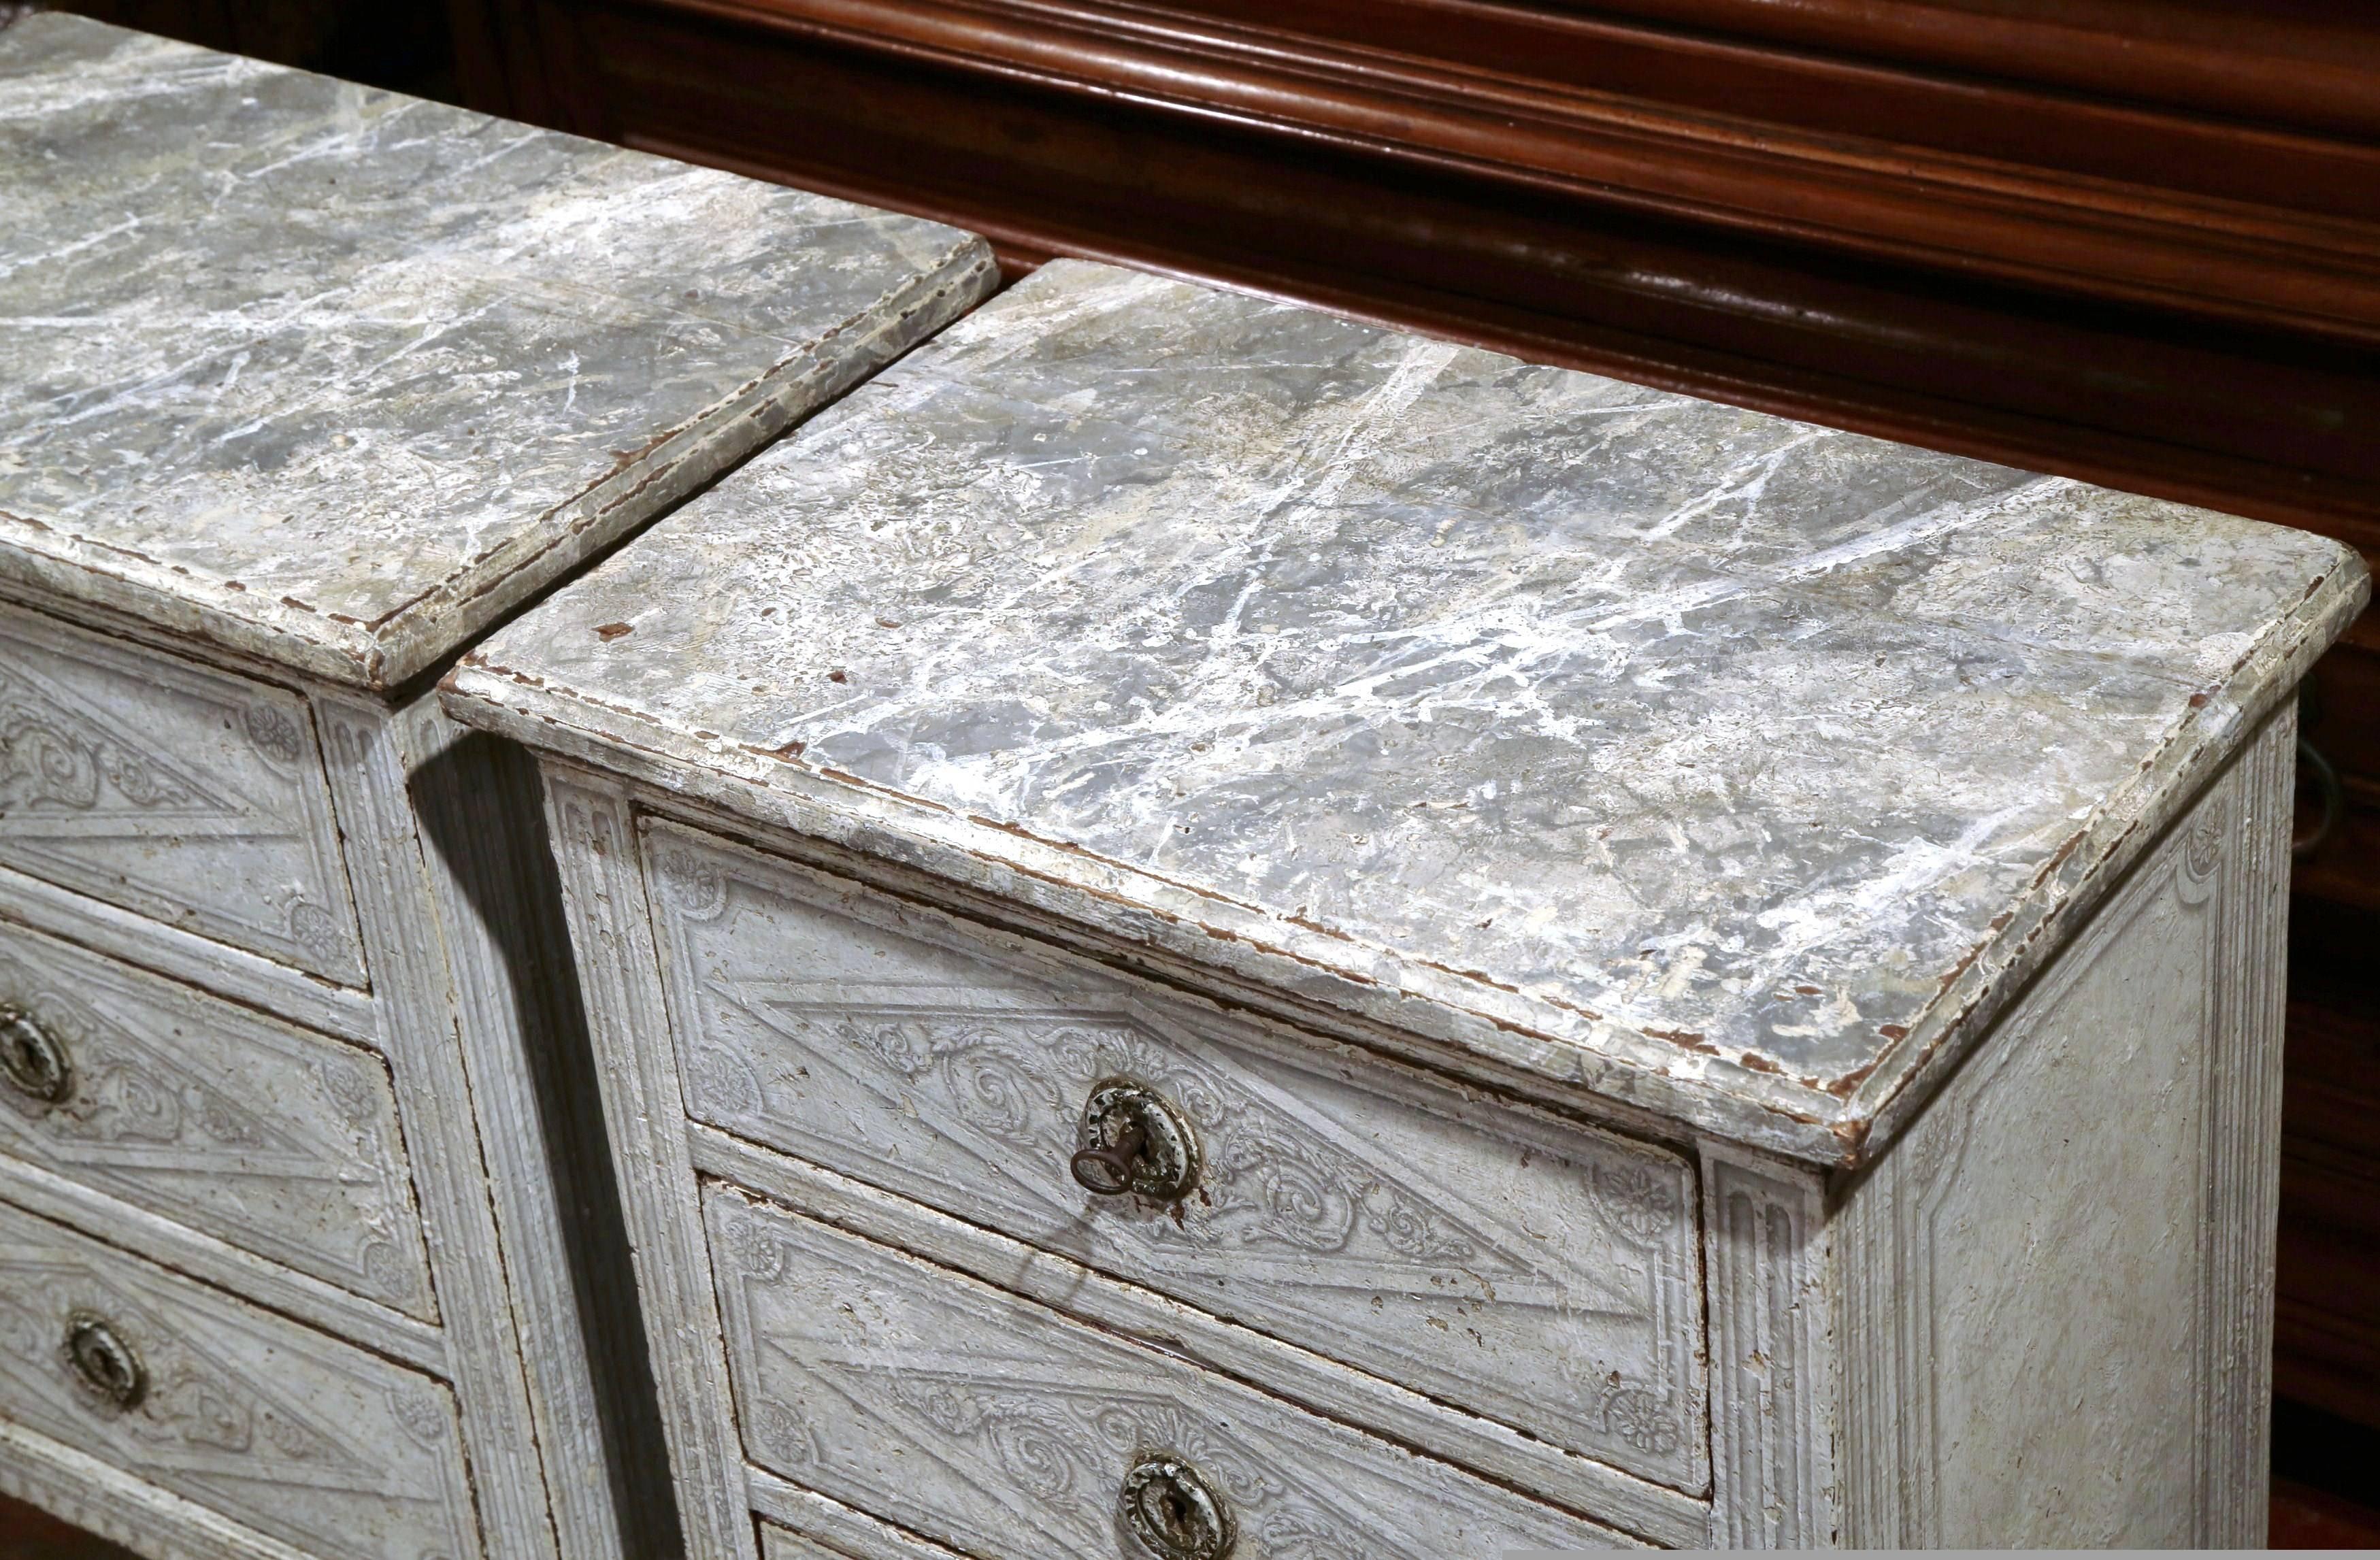 Complete your bedroom with this elegant pair of antique bedside tables from France, circa 1880. Painted in a beautiful gray and white palette, the side tables have three drawers across the front that are decorated with a geometric diamonds motif.